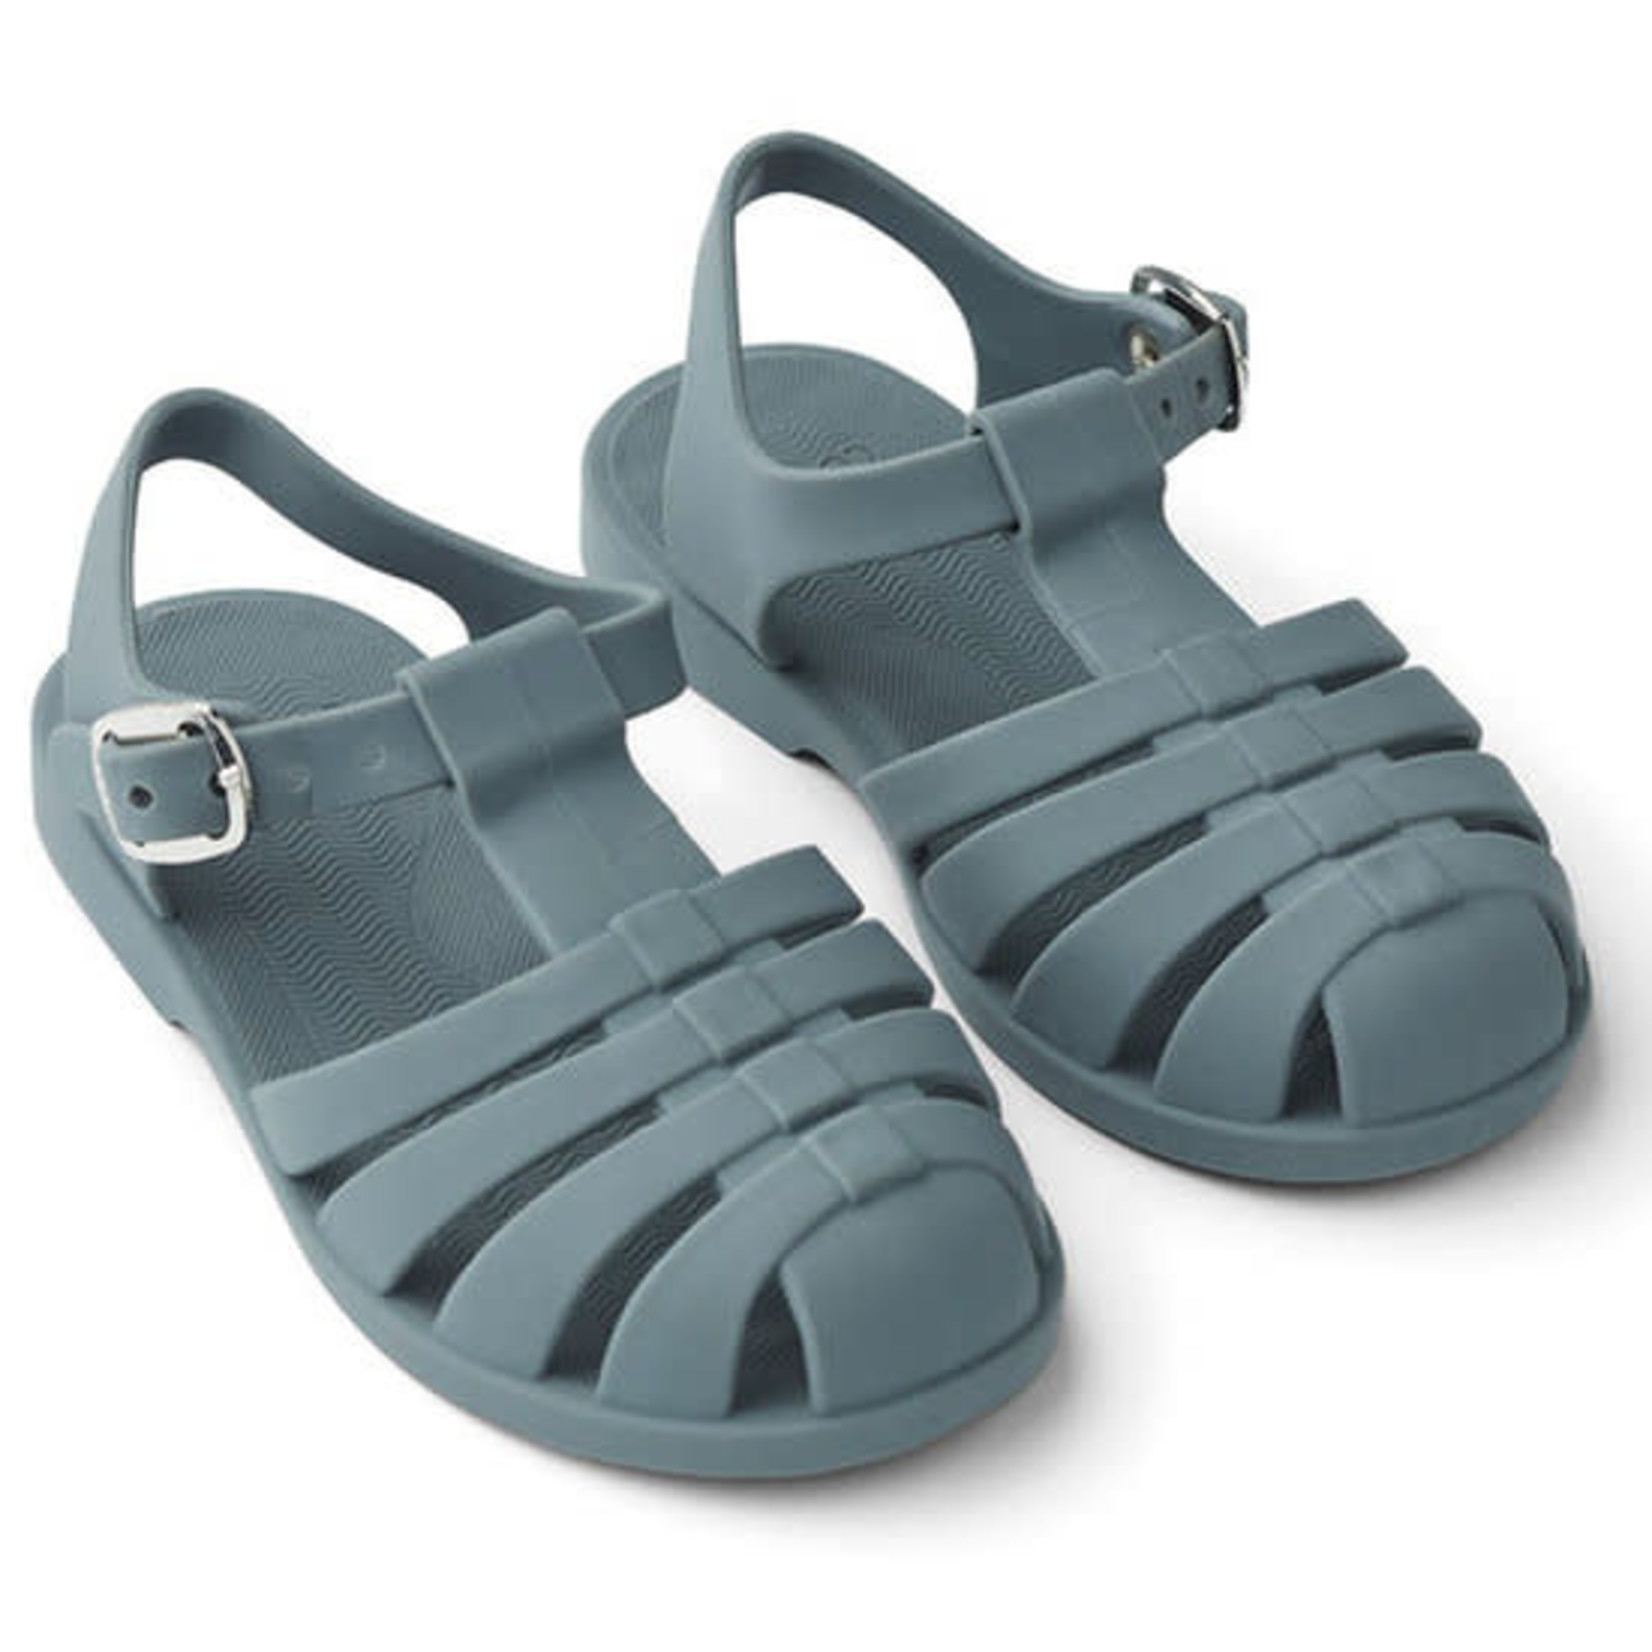 Liewood Liewood Bre sandals - Whale